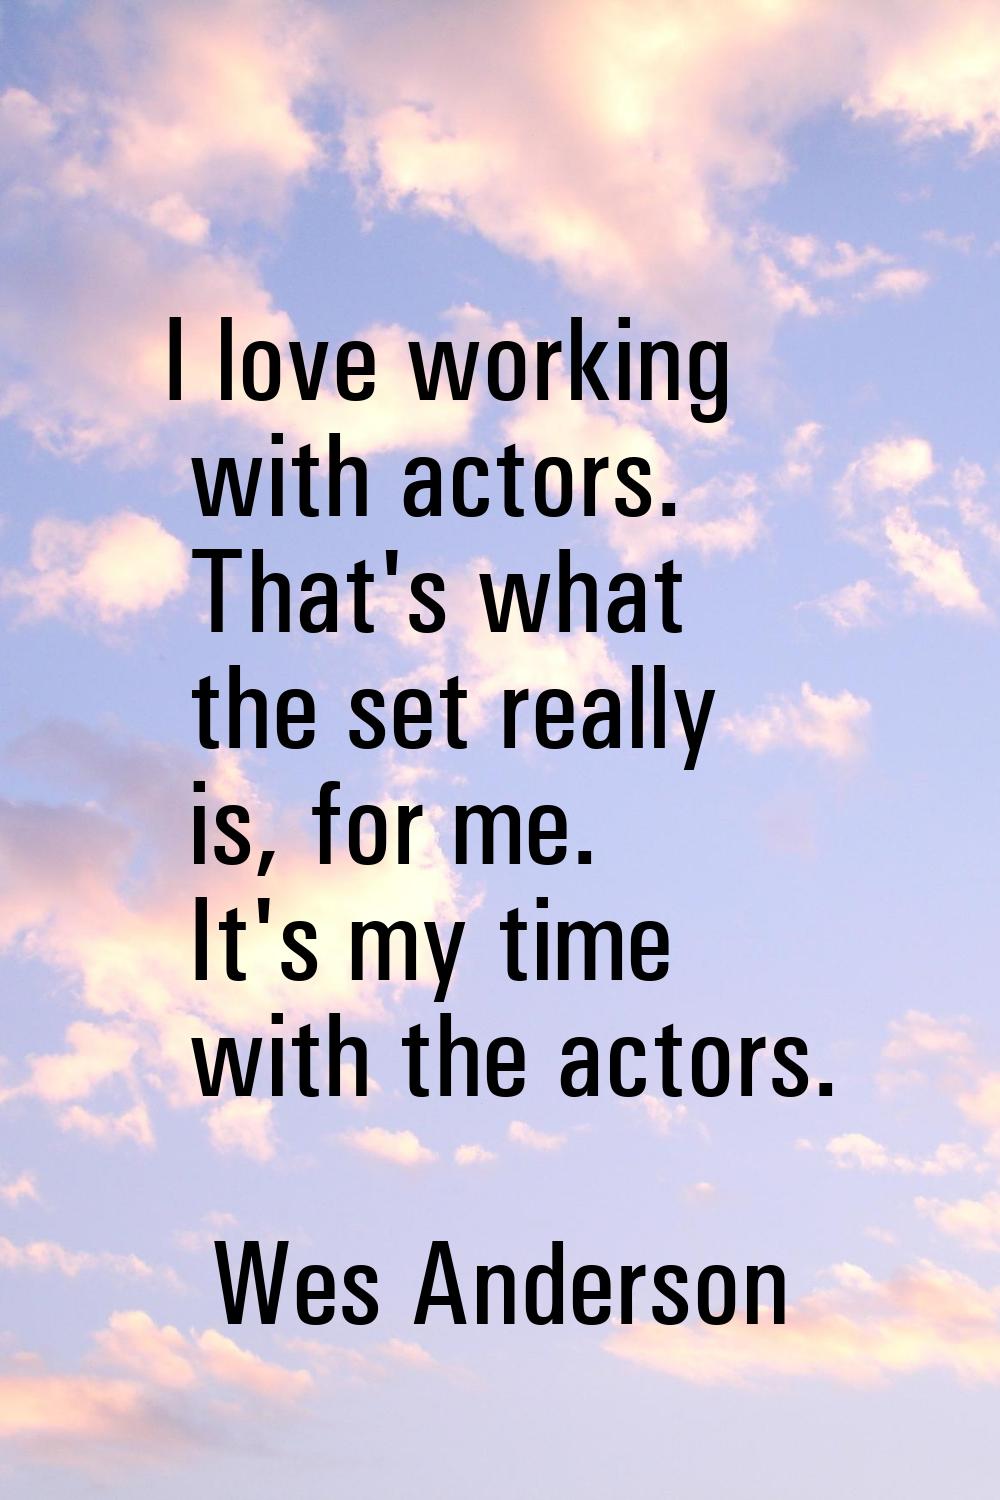 I love working with actors. That's what the set really is, for me. It's my time with the actors.